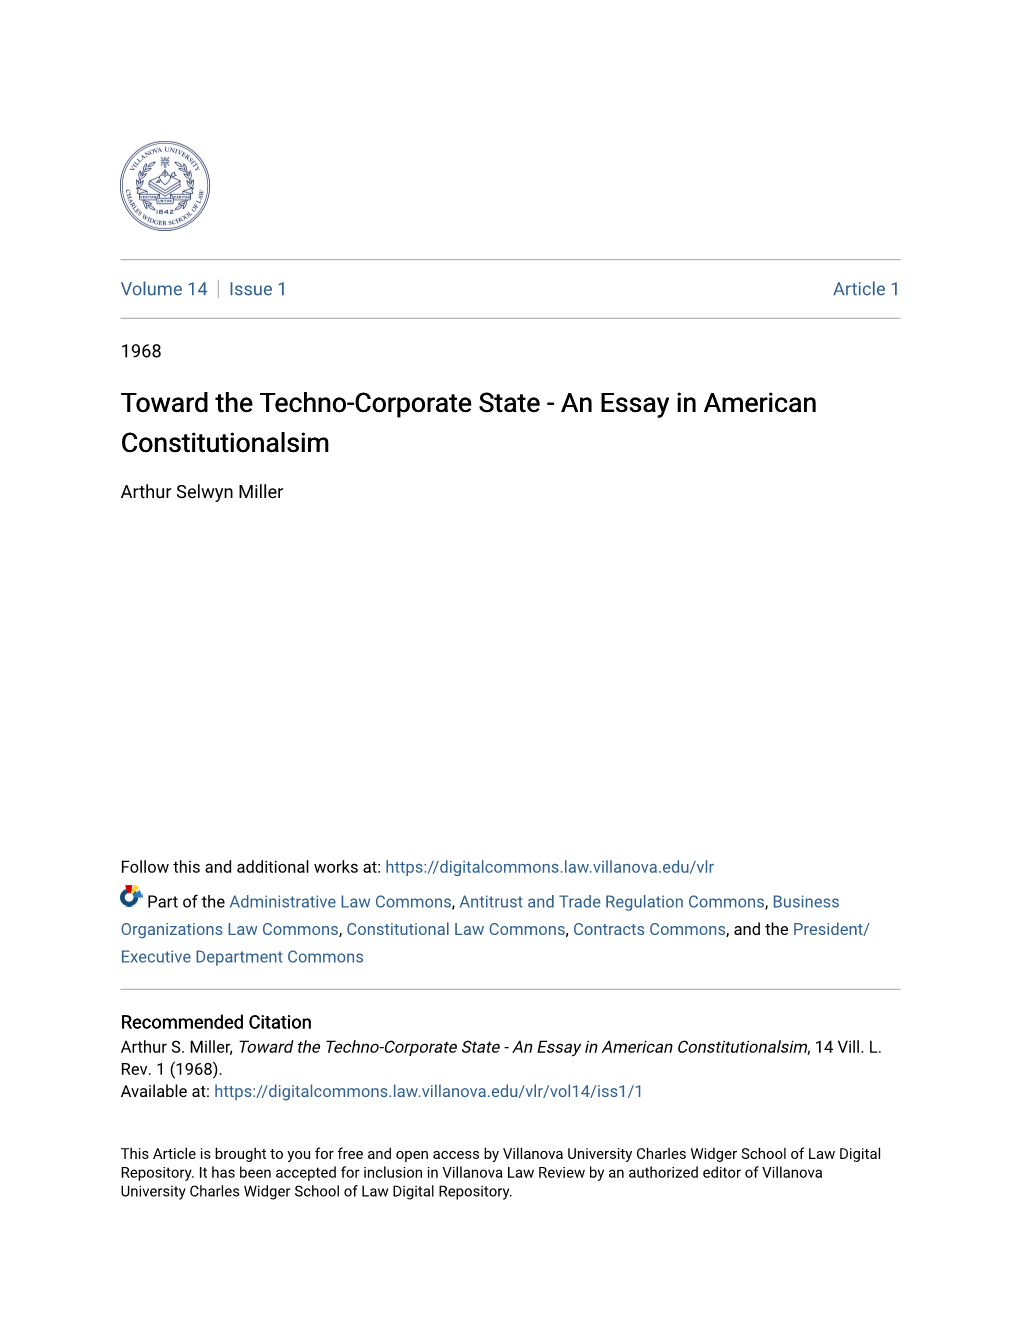 Toward the Techno-Corporate State - an Essay in American Constitutionalsim